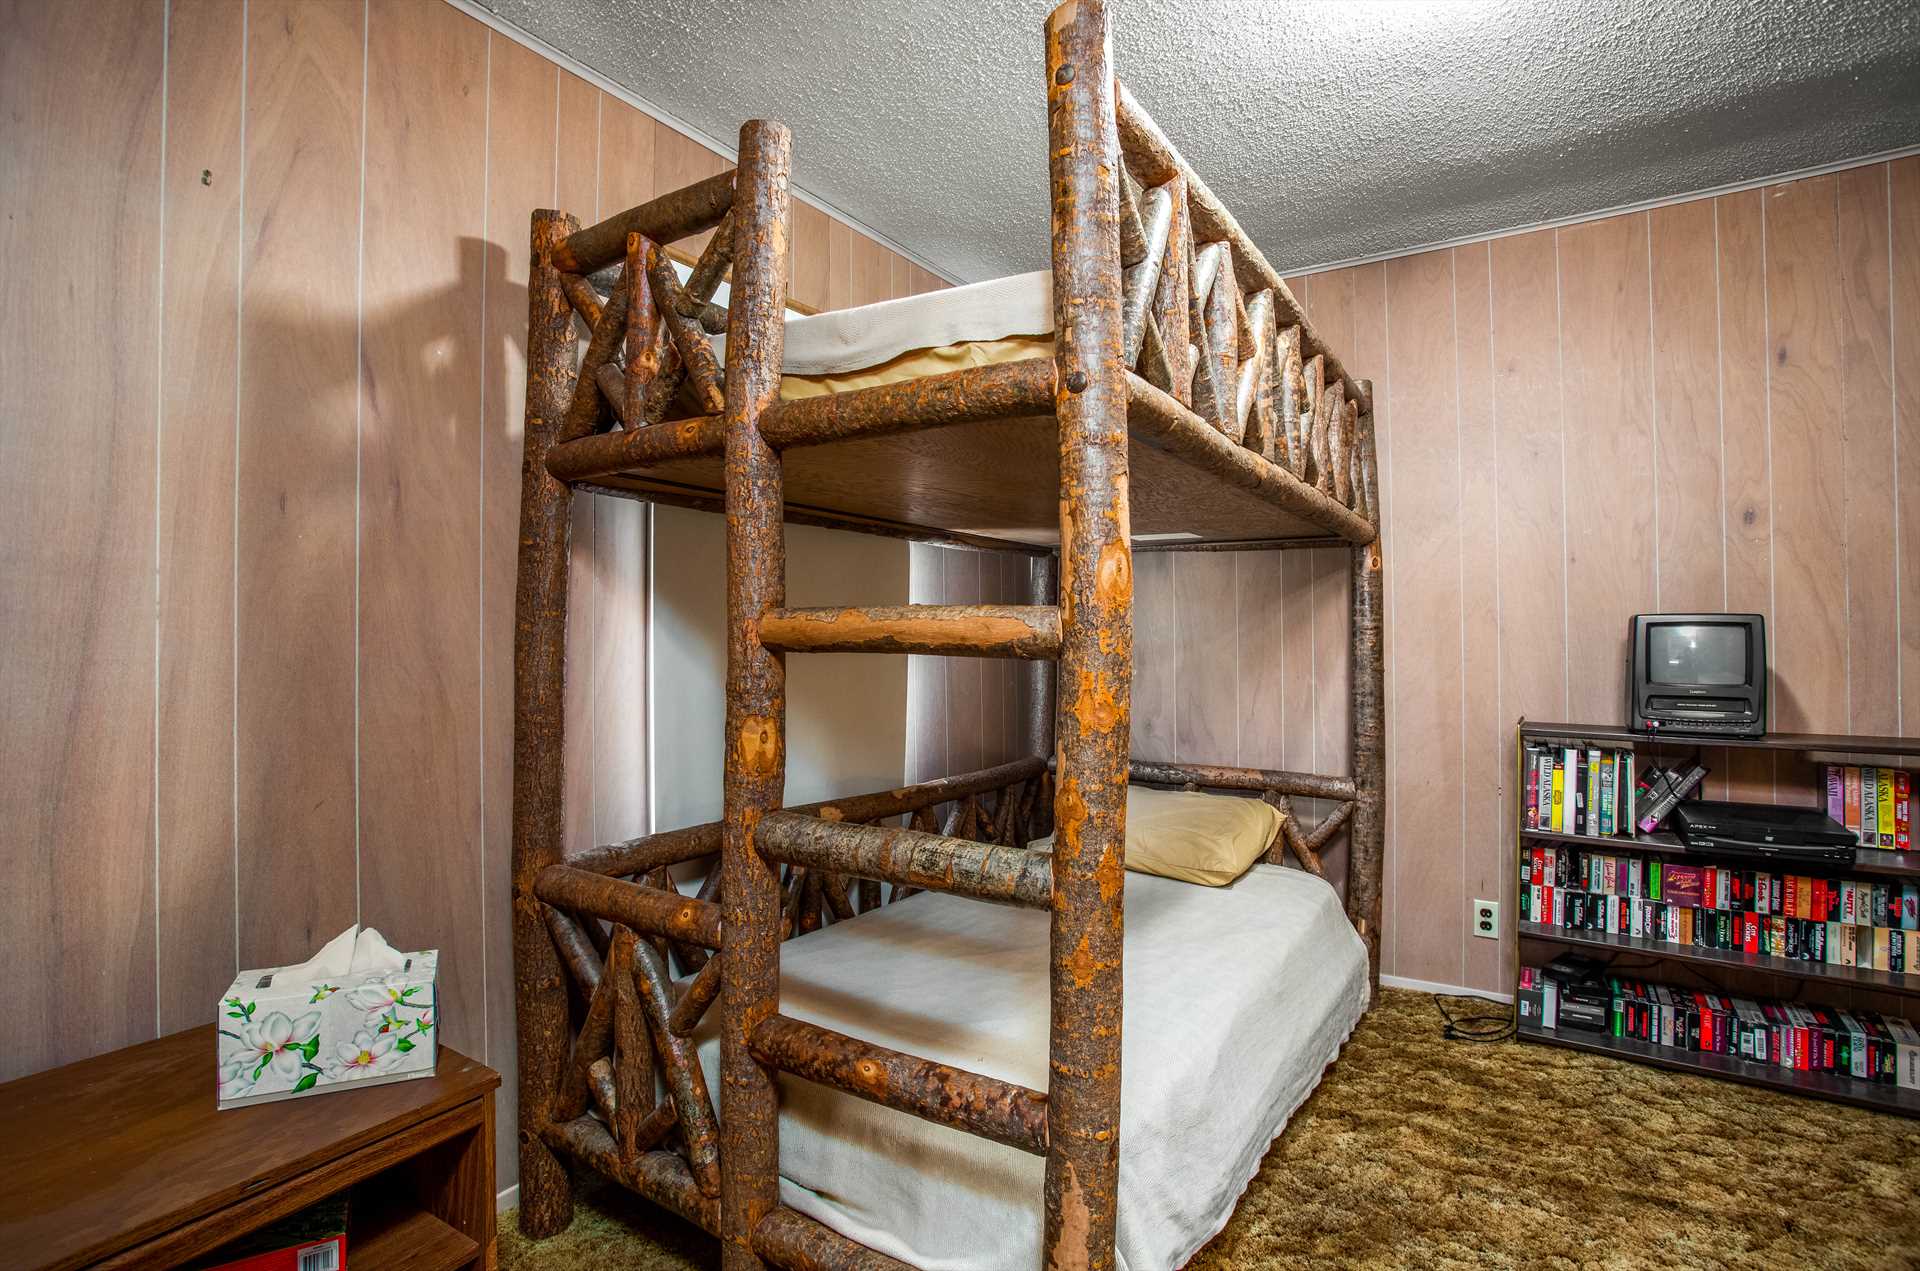                                                 Check out the wonderful wood work on the bunk bed frame!